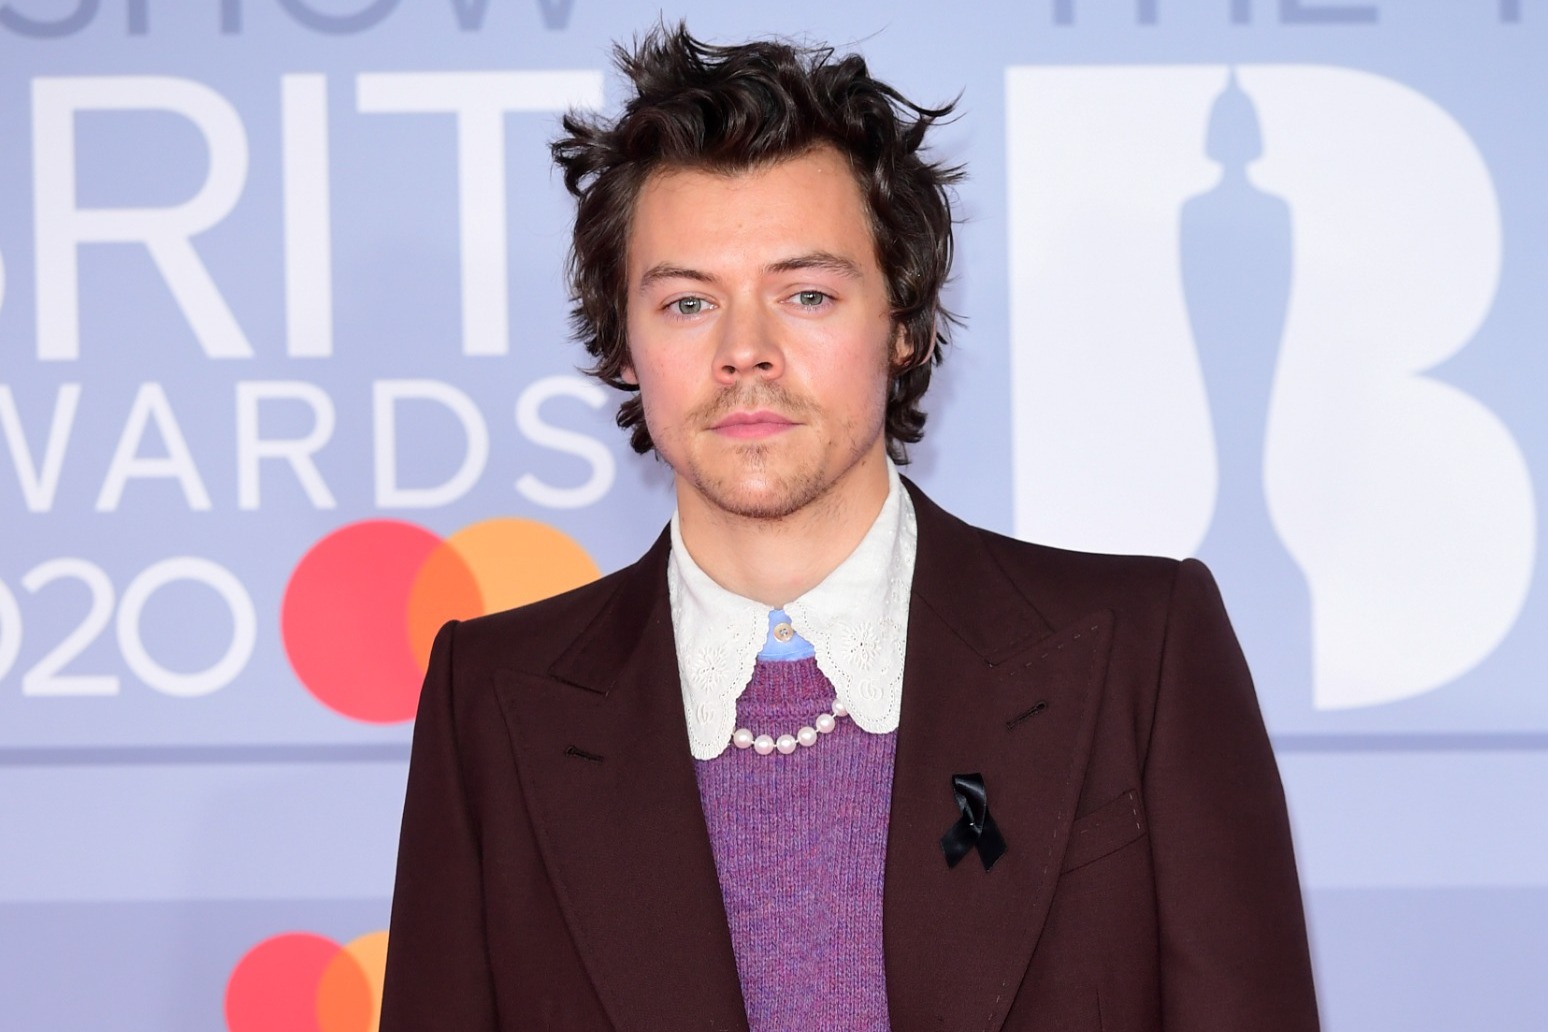 Harry Styles finds new direction on CBeebies Bedtime Stories 